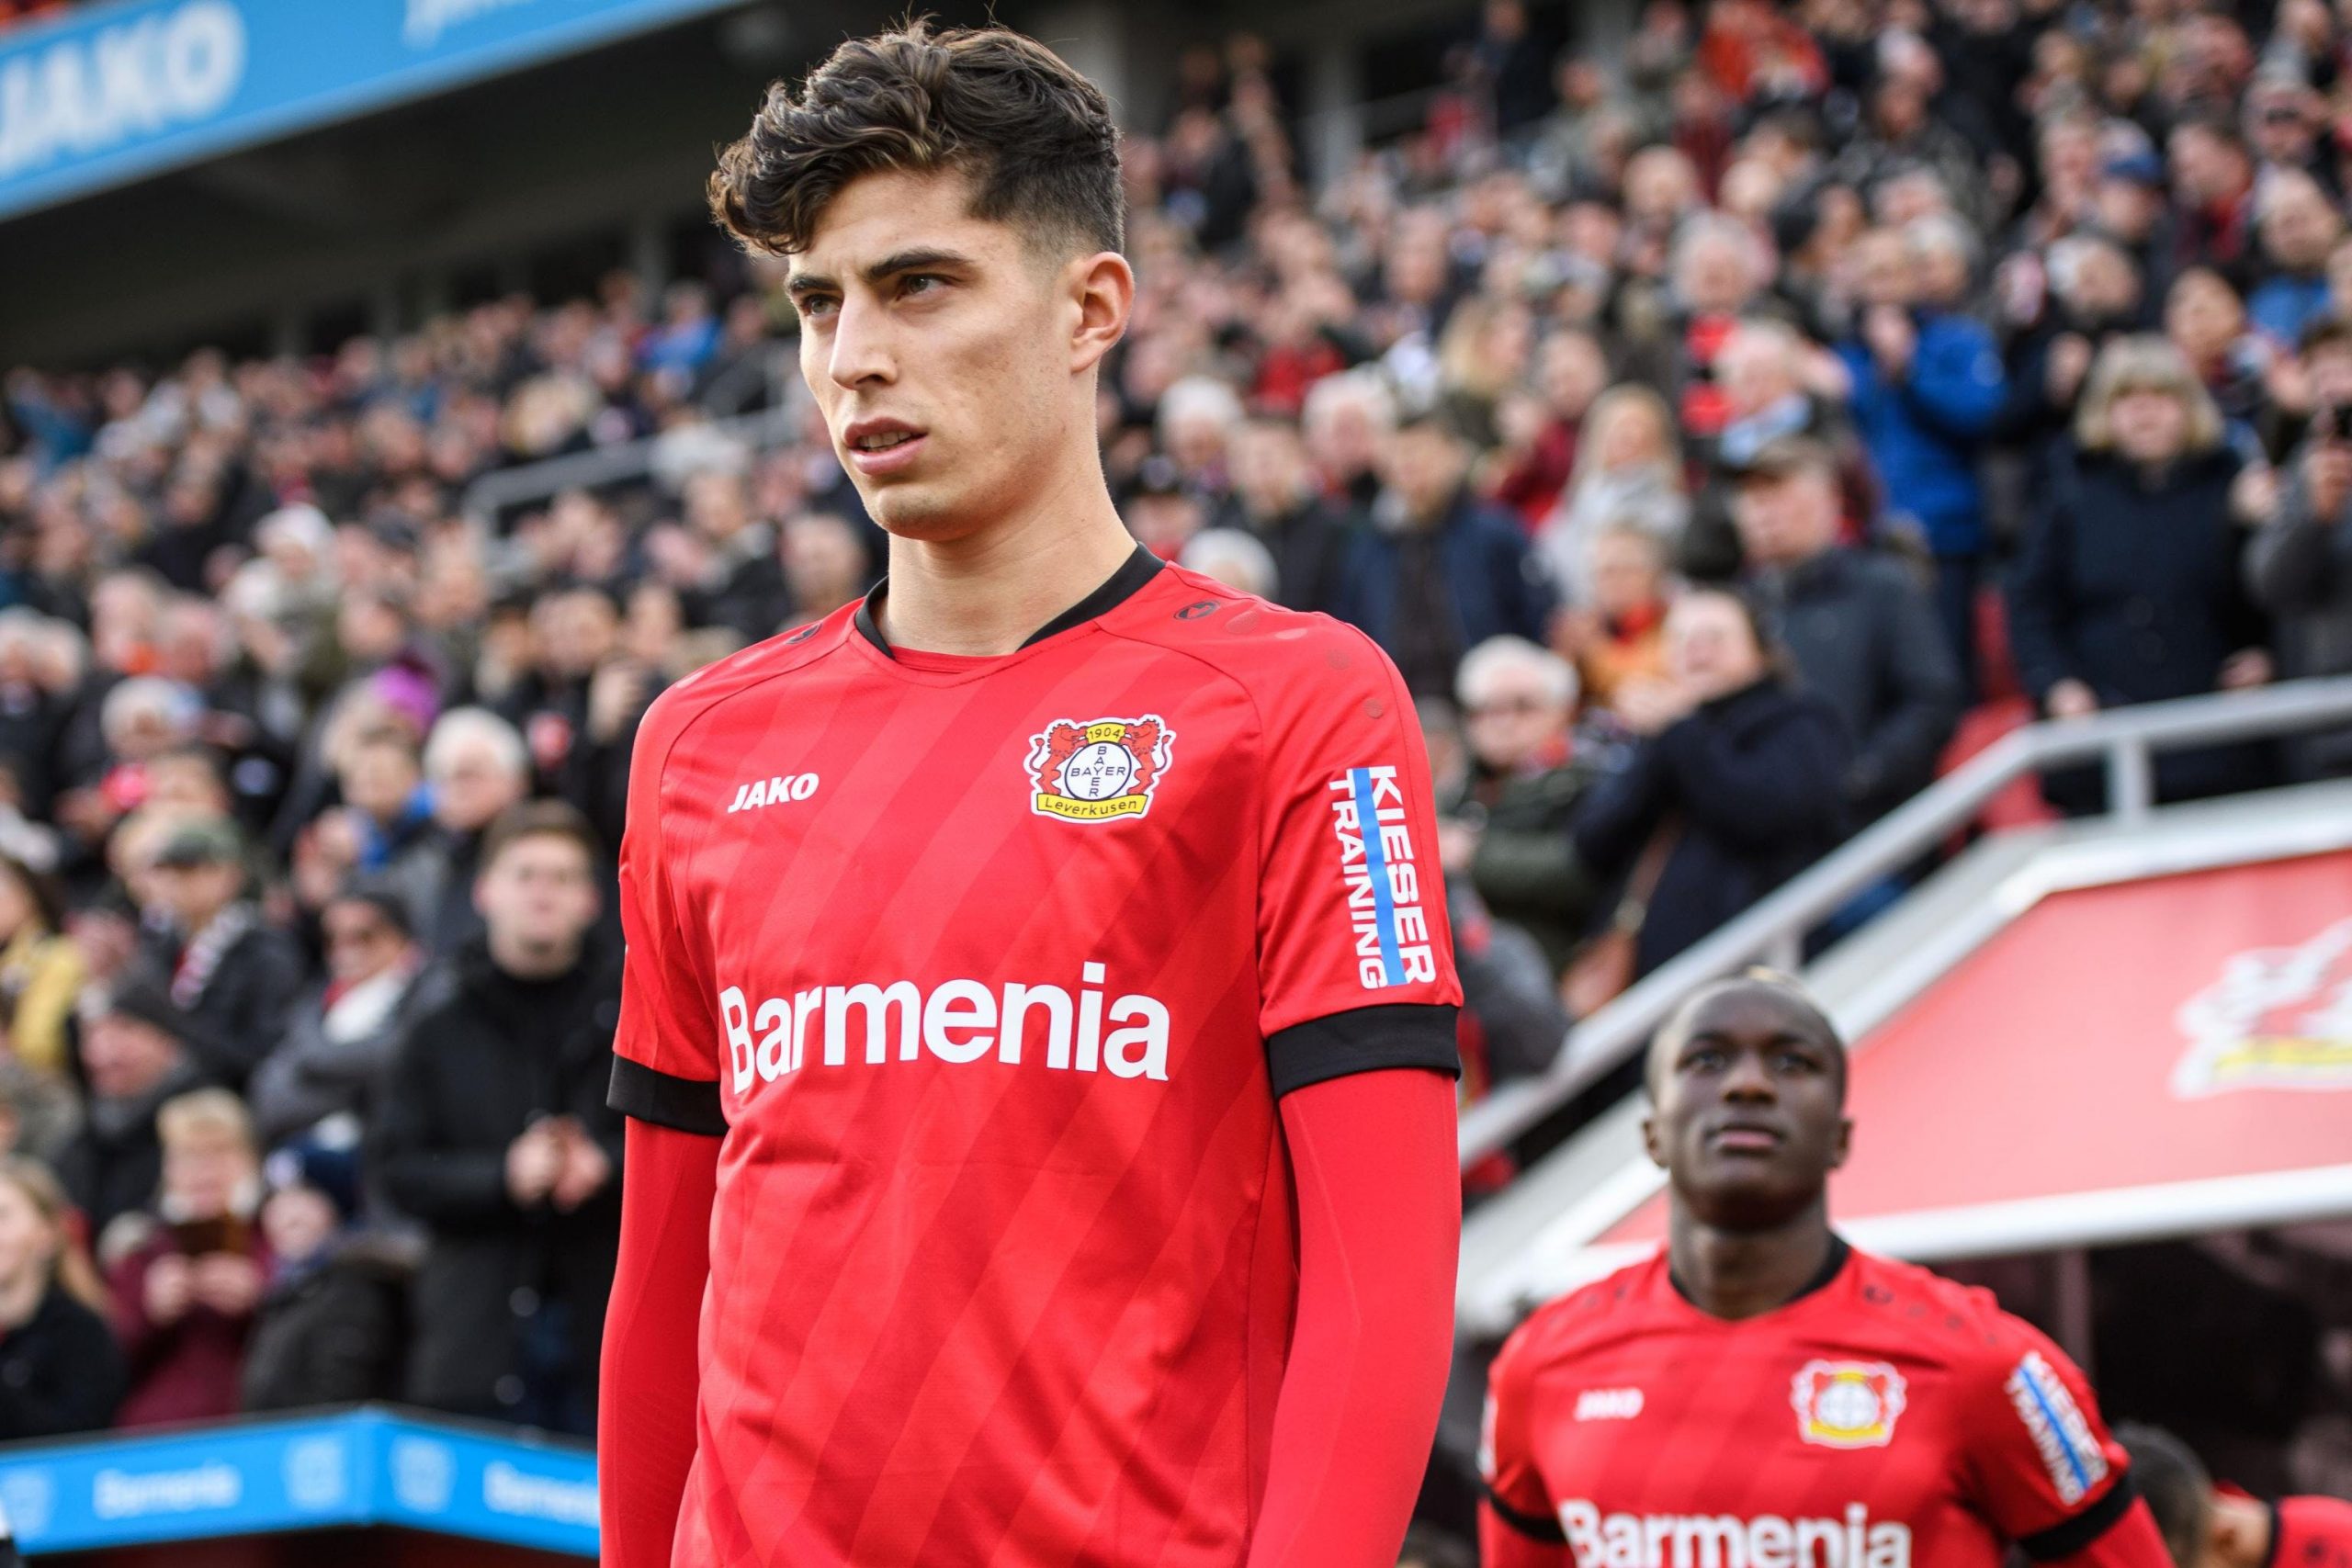 Havertz As a Possible Alternative to Sancho for Manchester United?